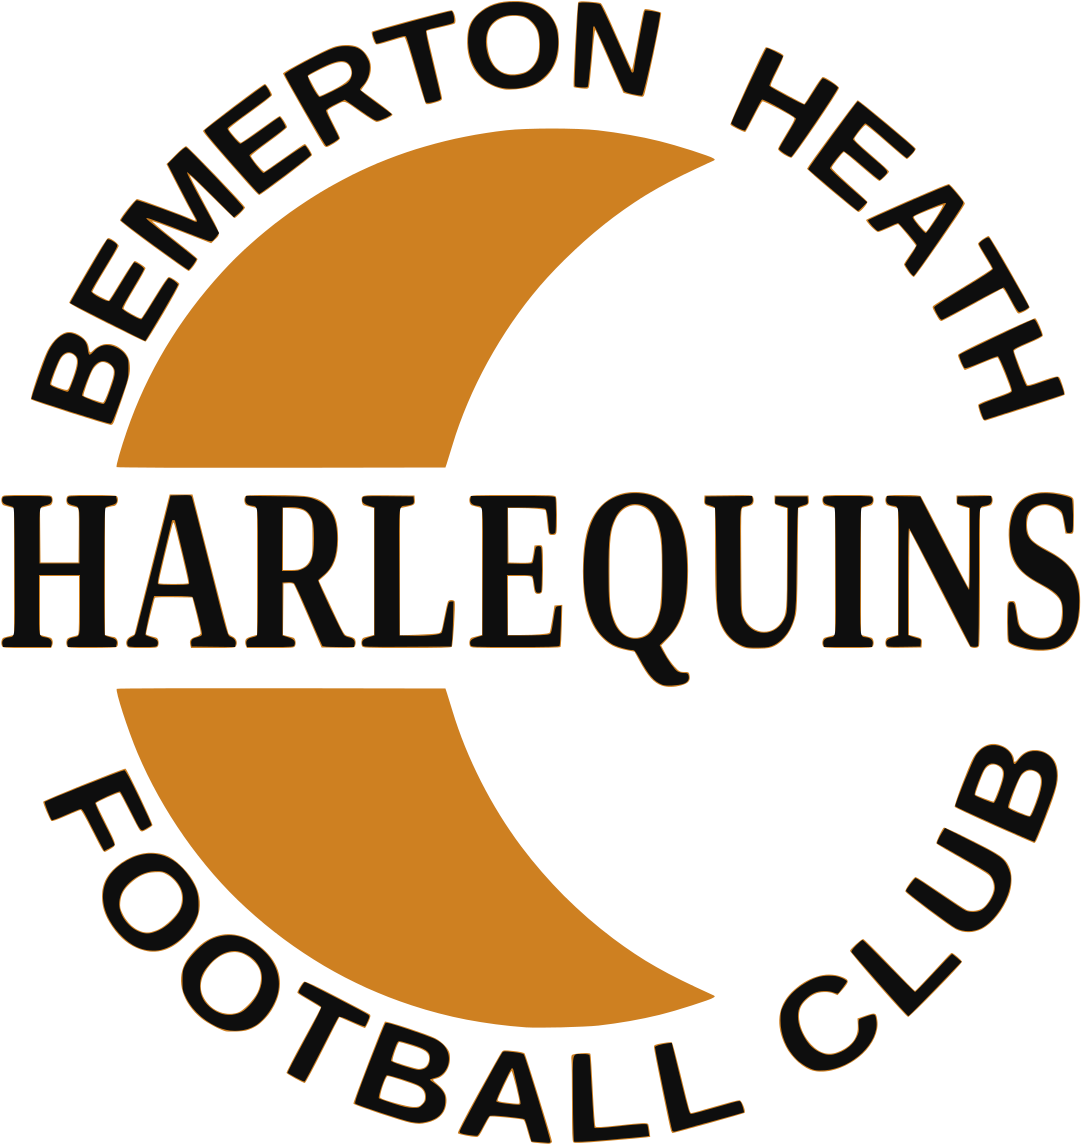 Scalable Vector Graphics Svg Working Group Charter - Bemerton Heath Harlequins Fc (1192x1192)